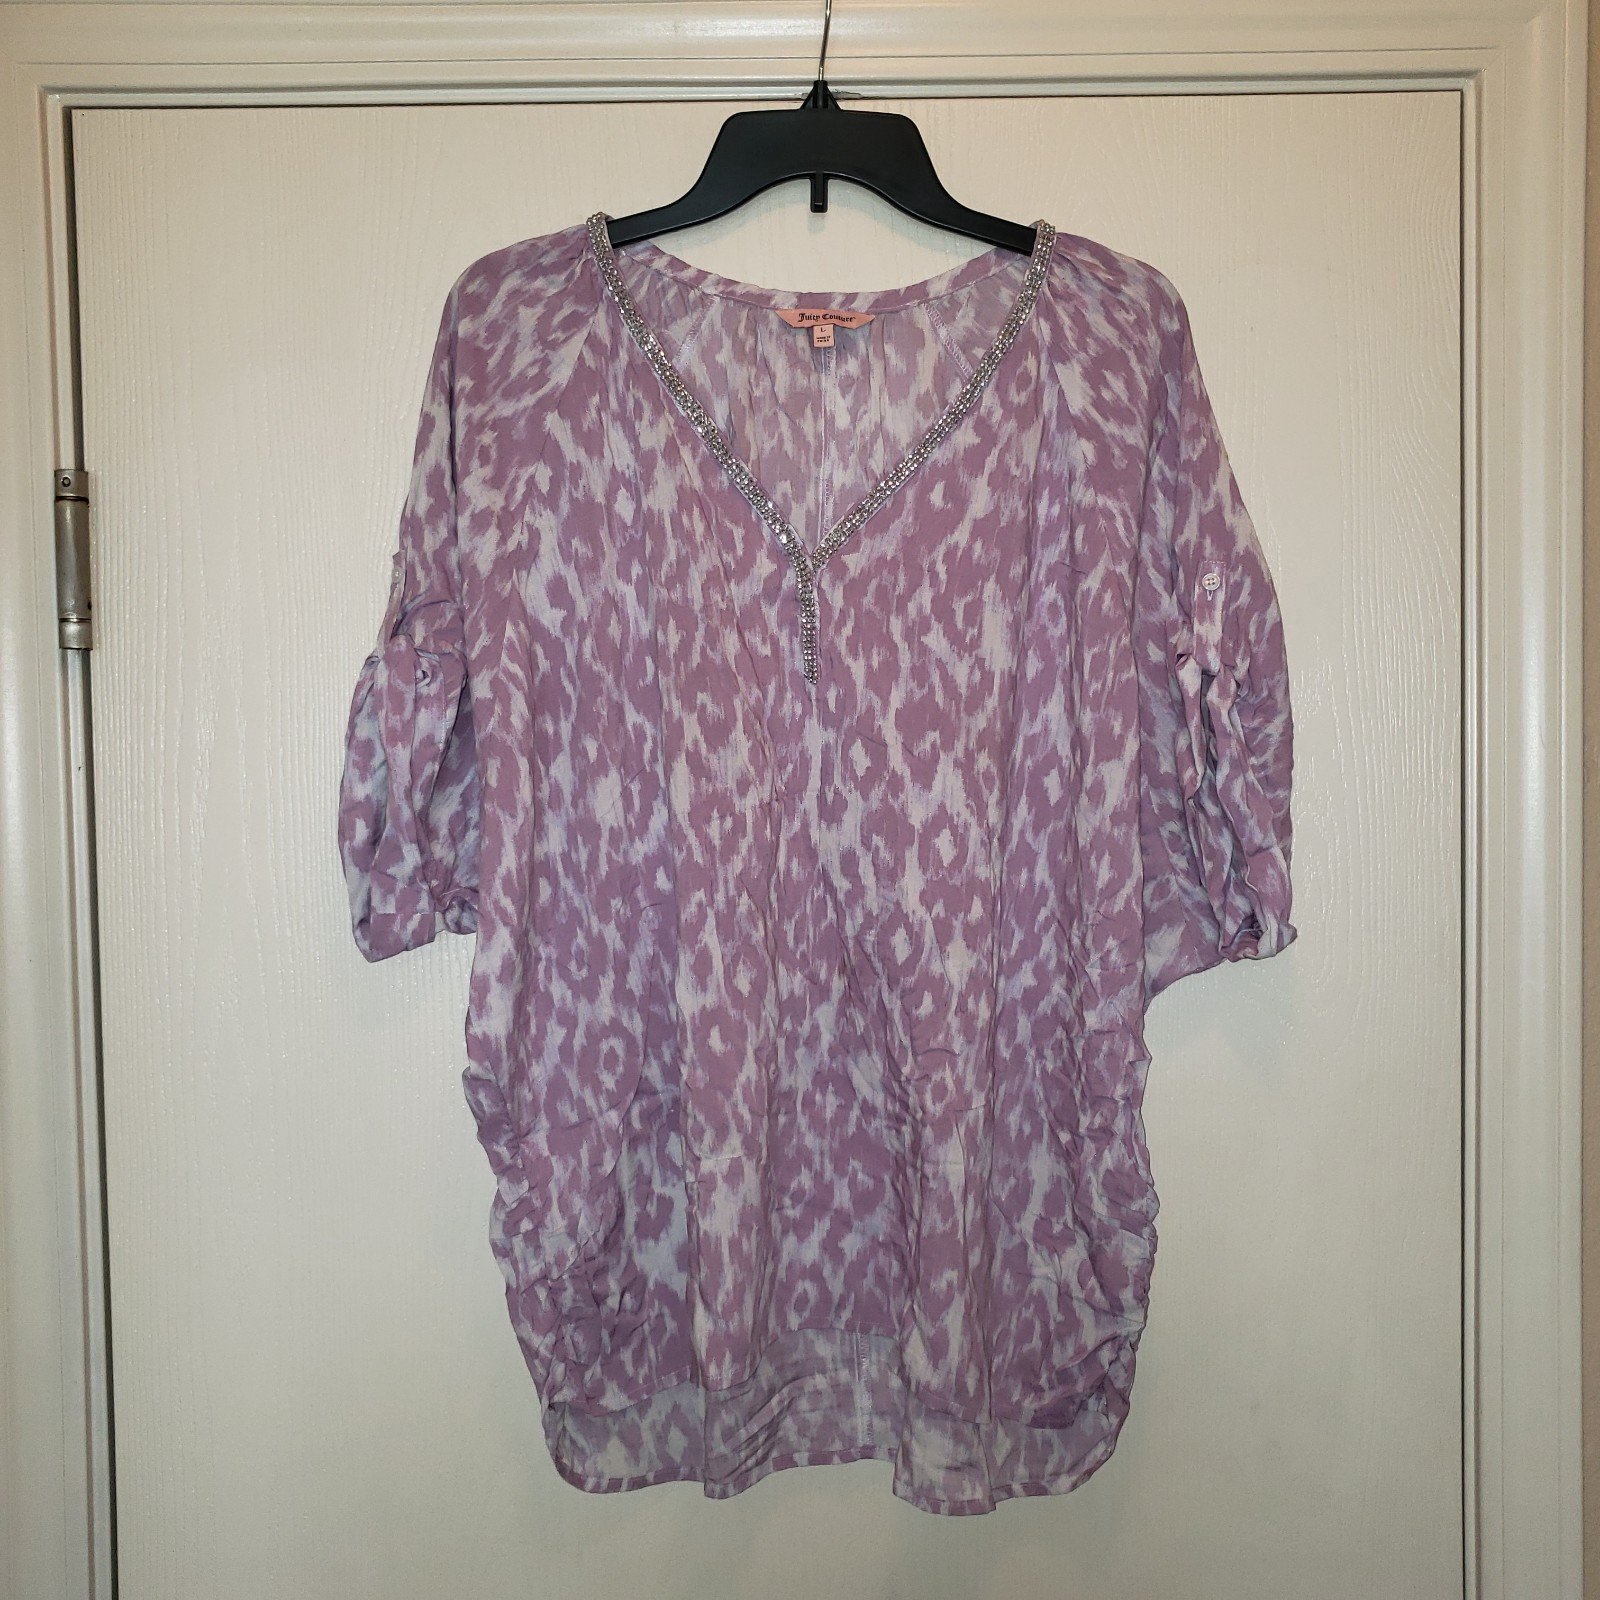 Personality Size Large JUICY COUTURE Lilac Animal Print Blouse Top ILNNhqm2B Online Exclusive